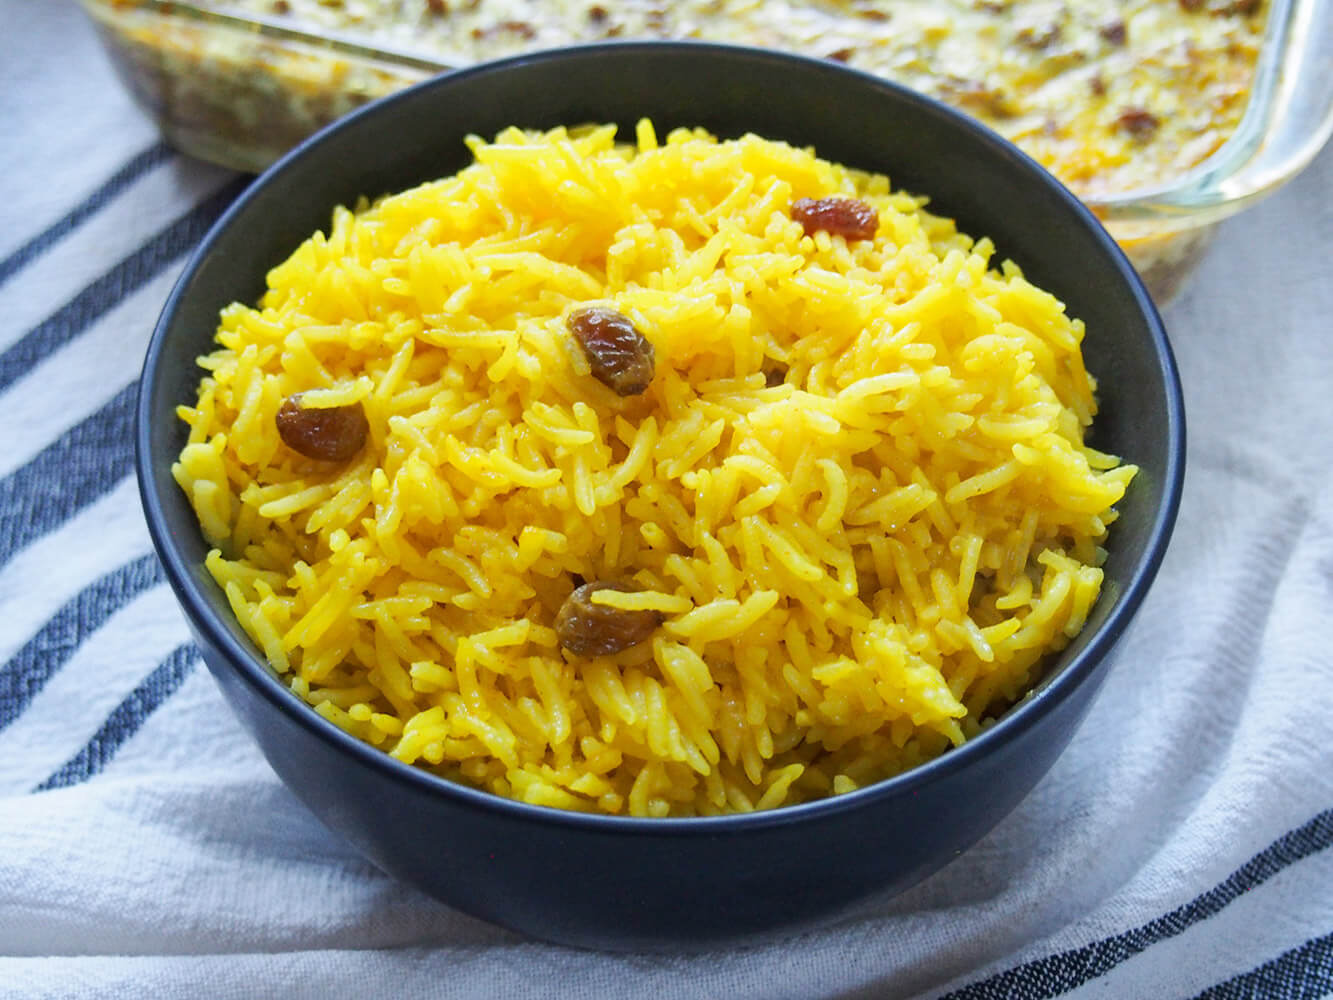 bowl of South African yellow rice